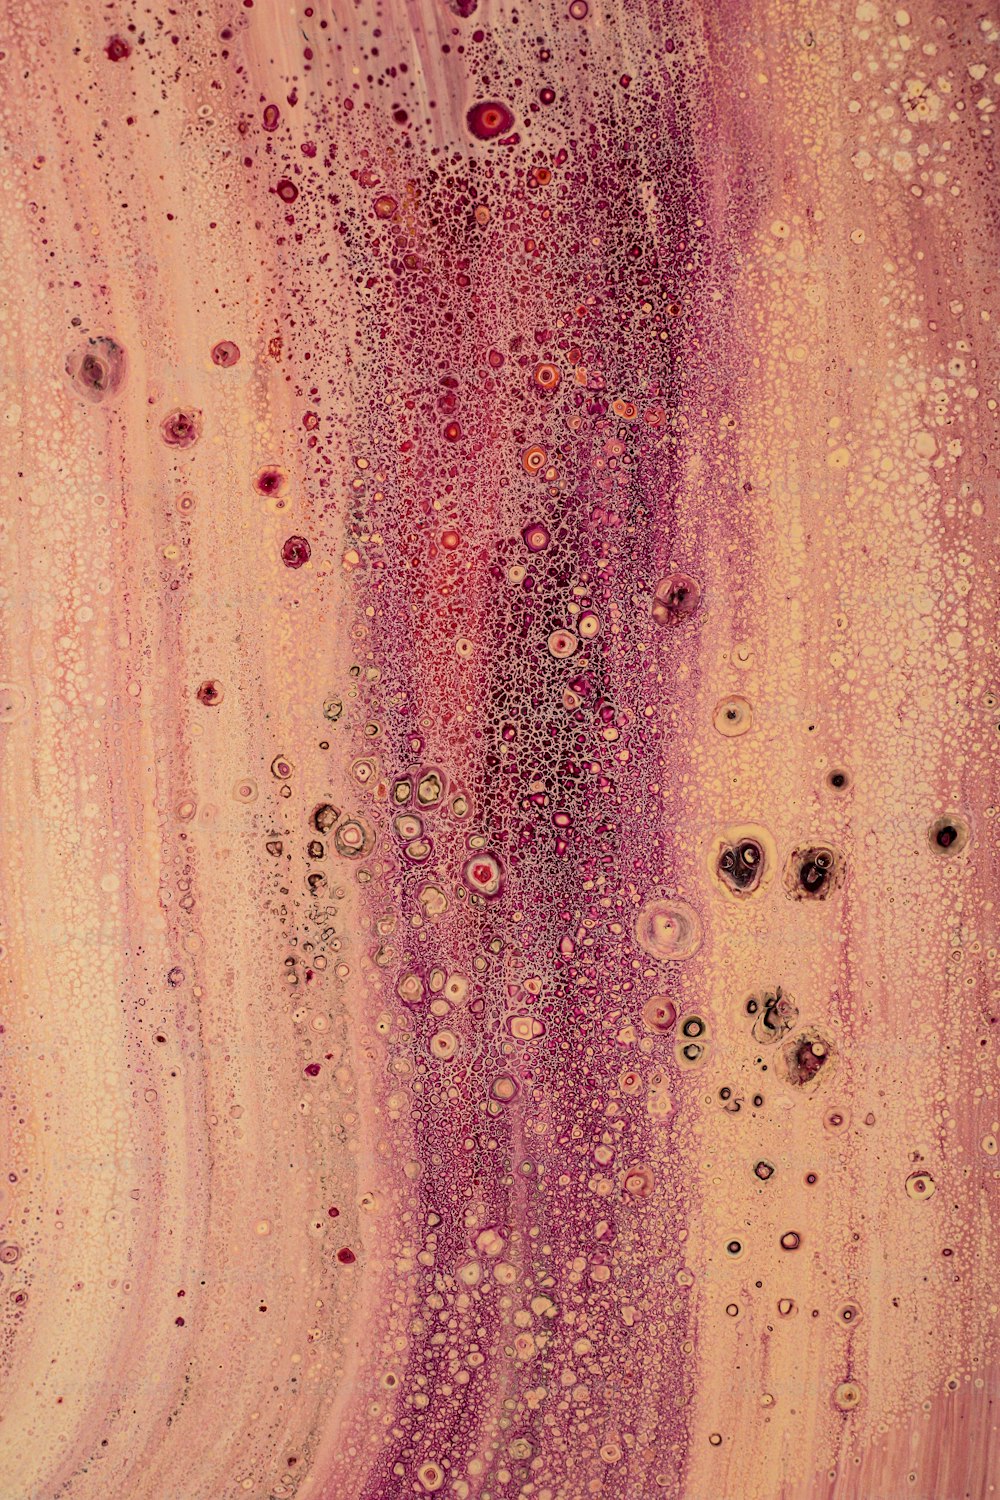 a close up of a pink and purple substance